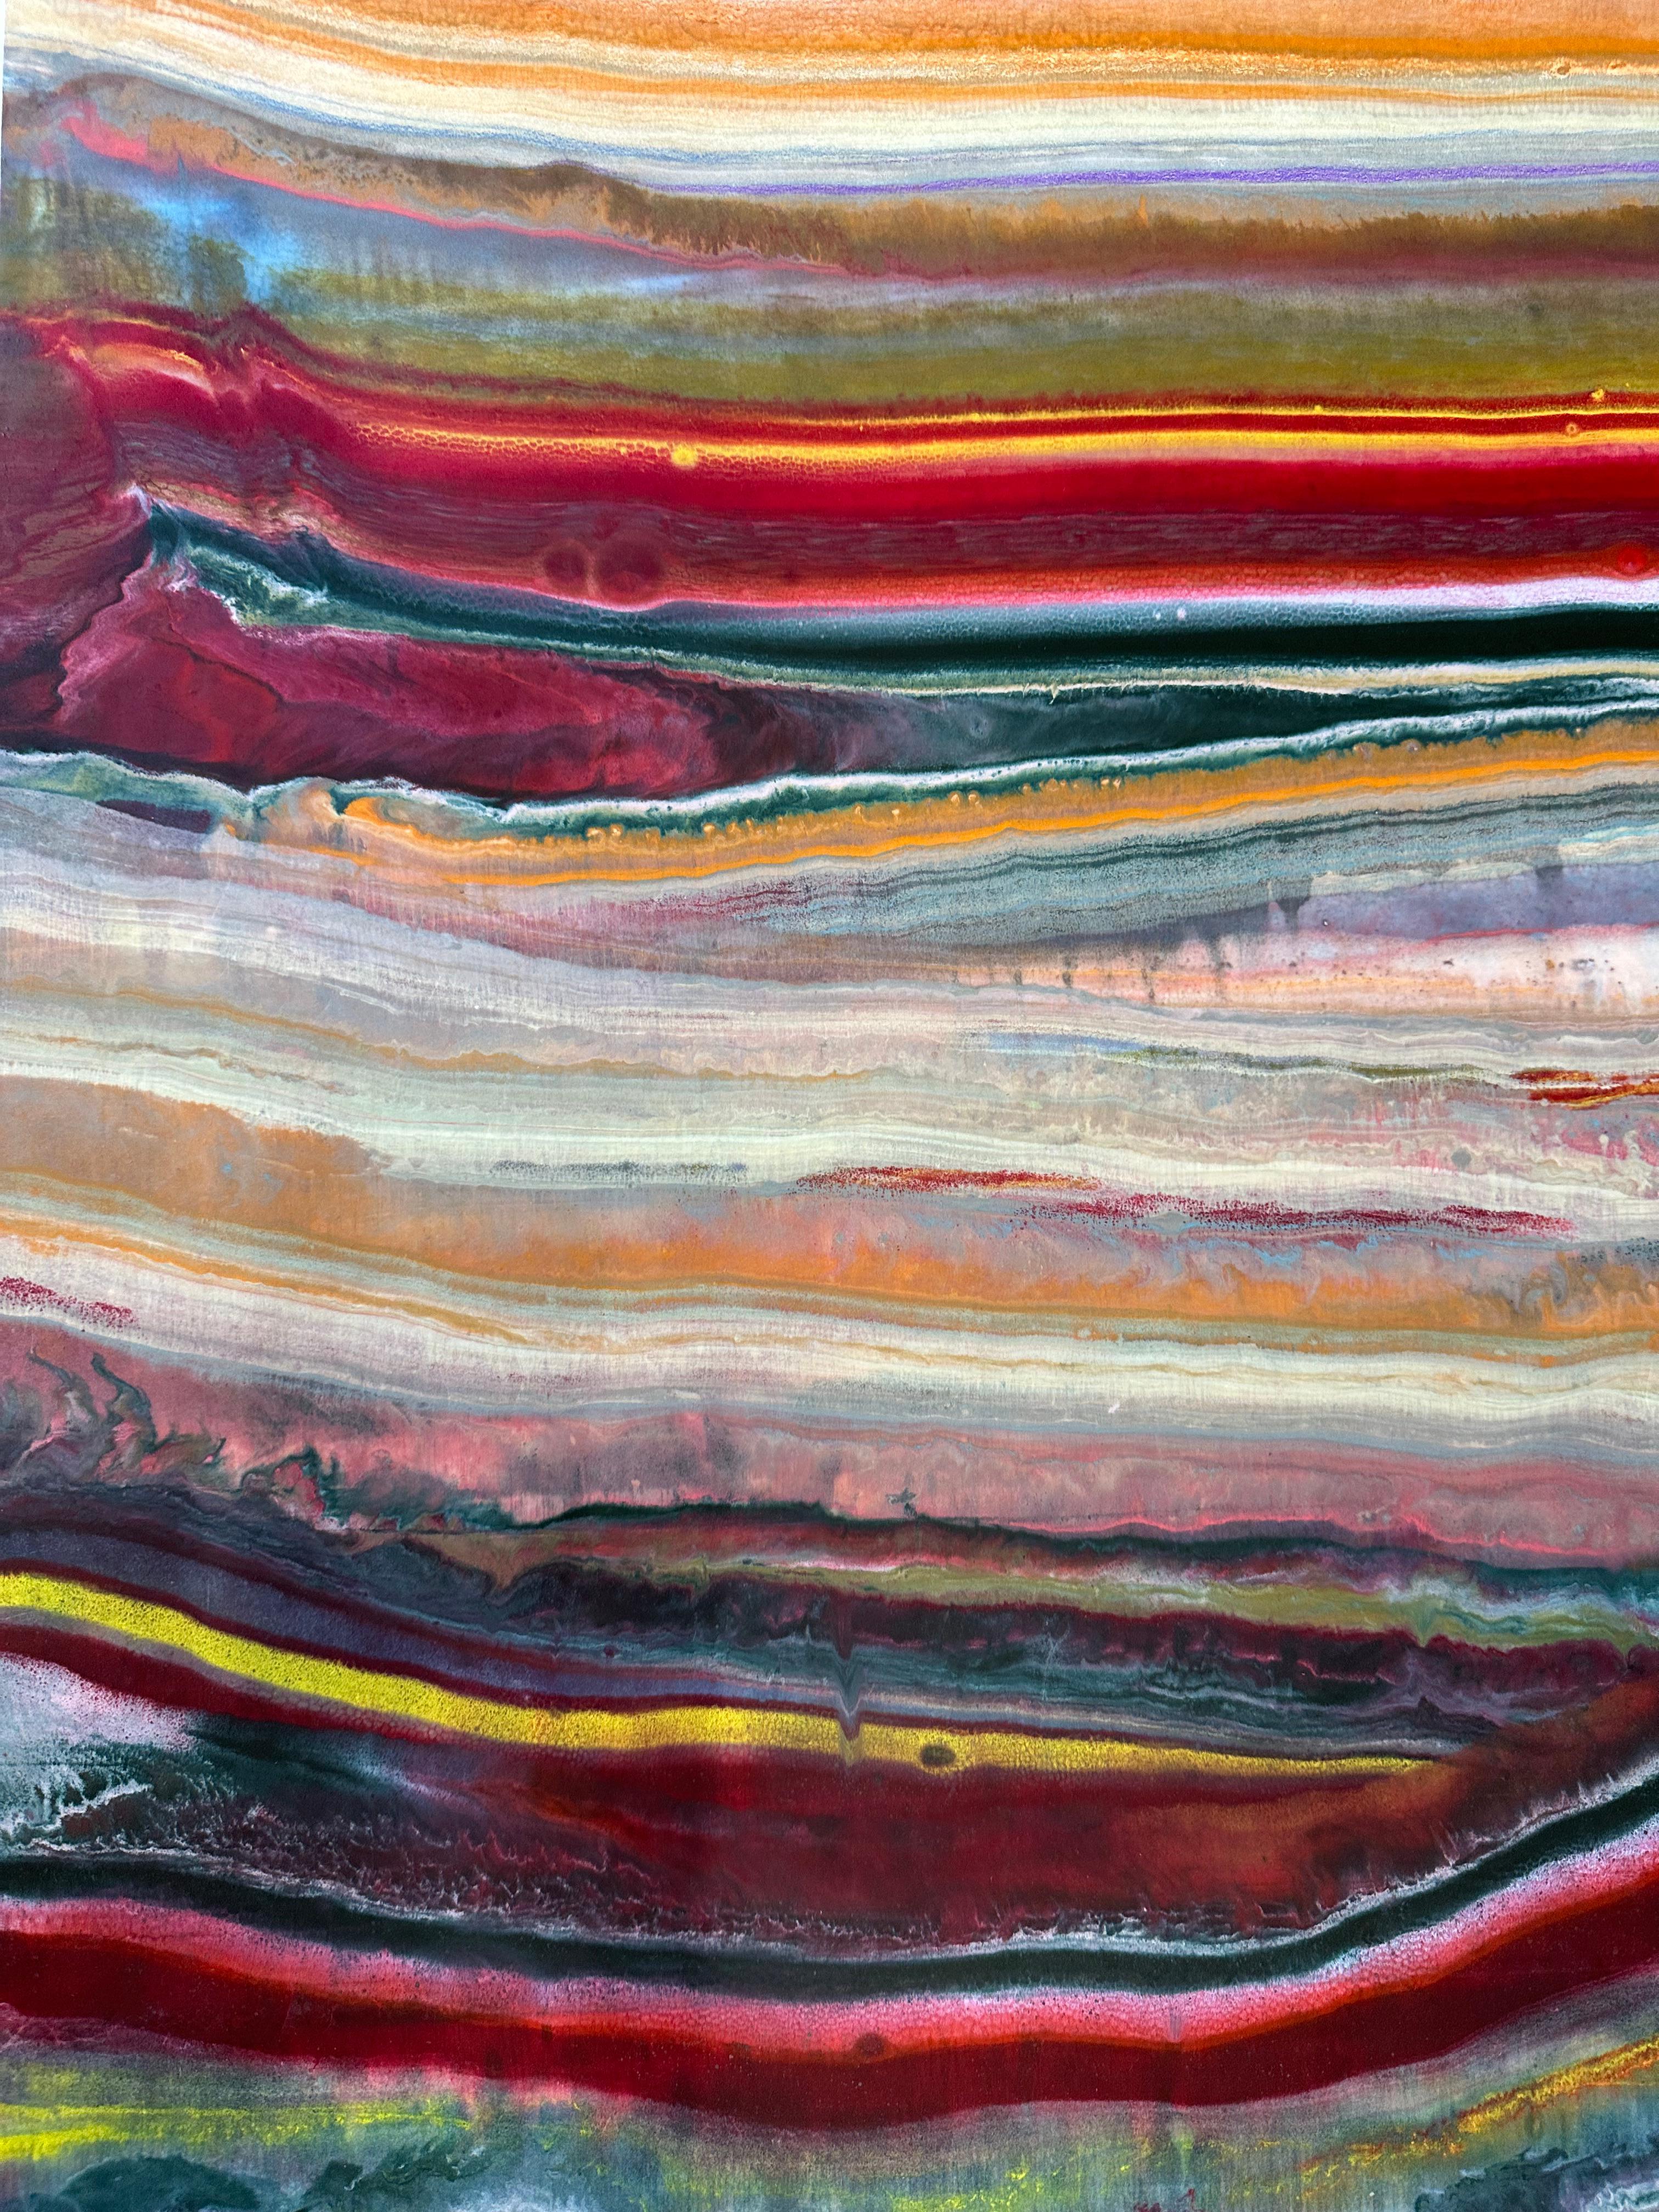 Laura Moriarty's Talking to Rocks 19 is a multicolored encaustic monotype on kozo paper. Layers of pigmented beeswax on lightweight paper create an undulating composition suggesting layers of the earth's crust and geological formations depicted in